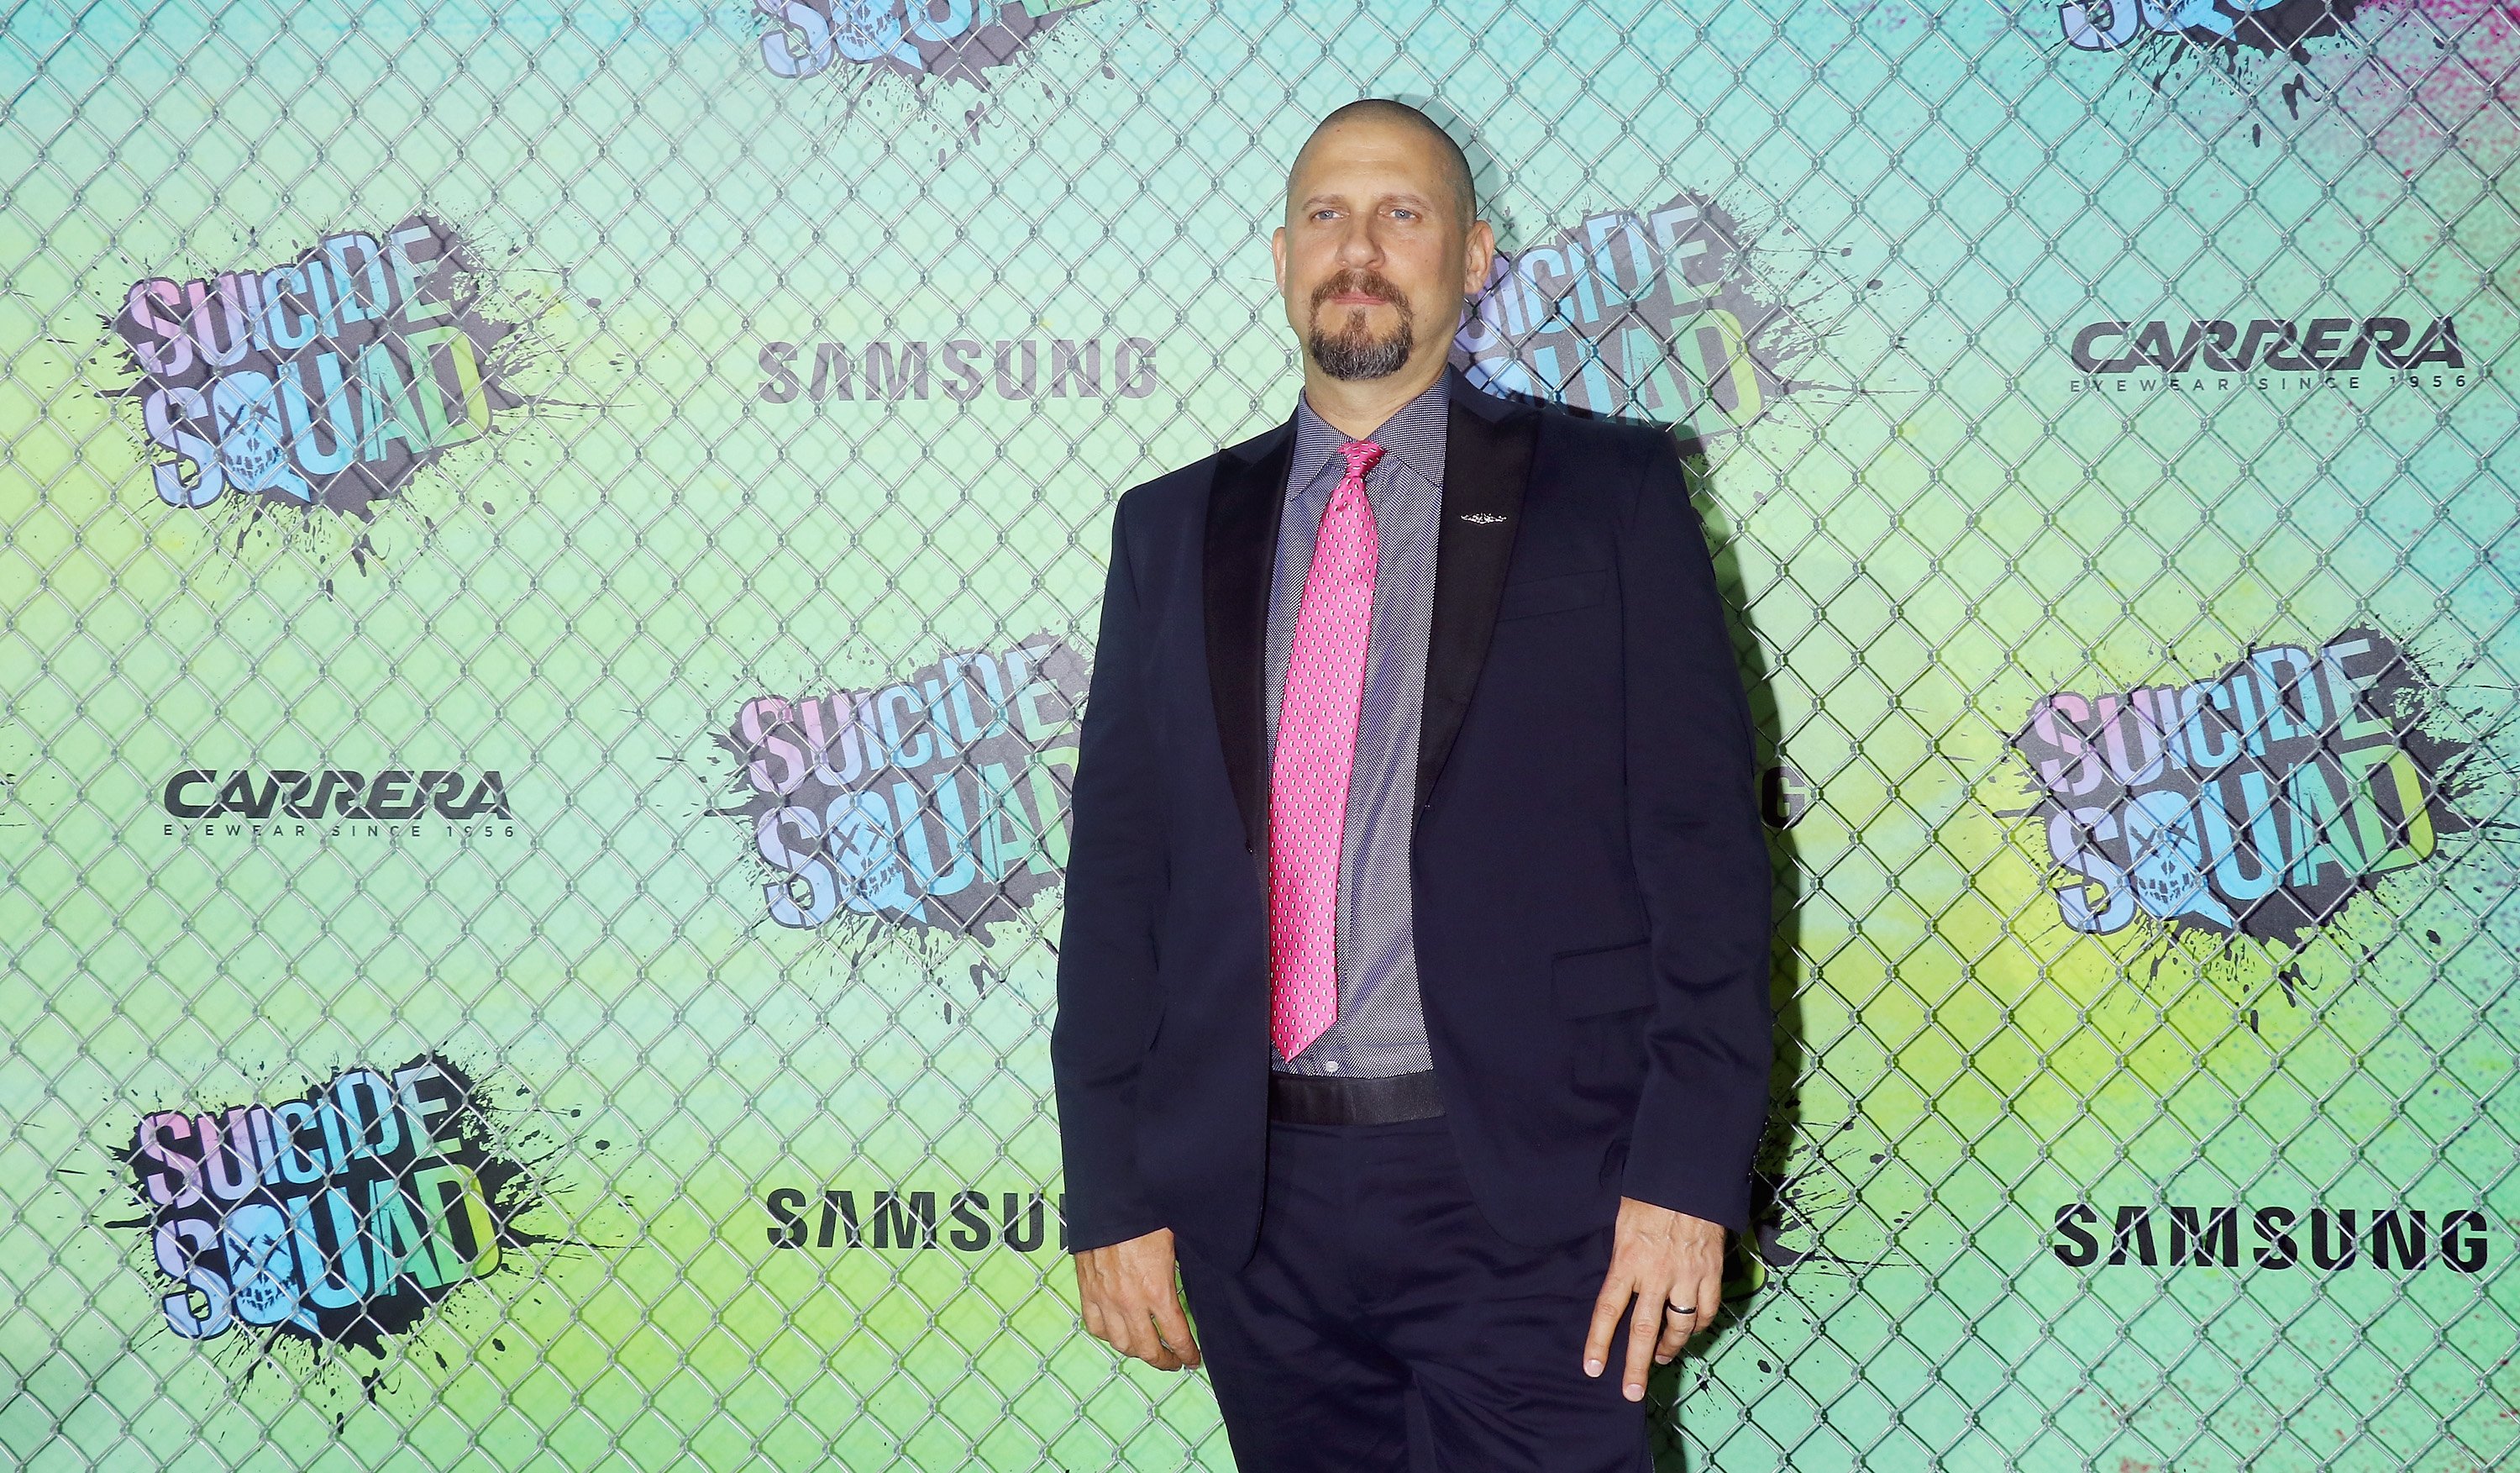 David Ayer at the Suicide Squad premiere